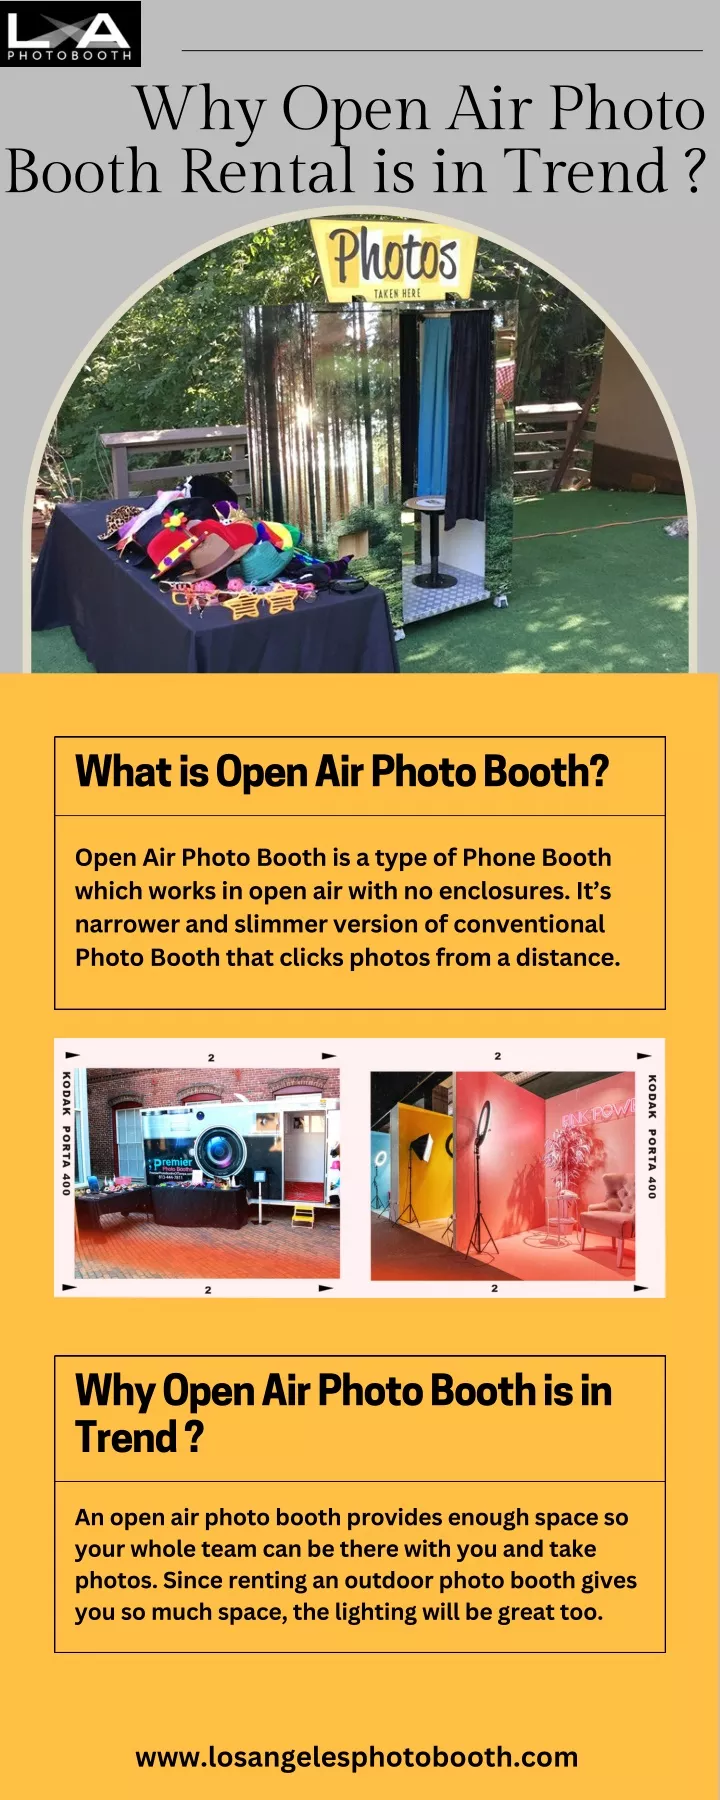 why open air photo booth rental is in trend